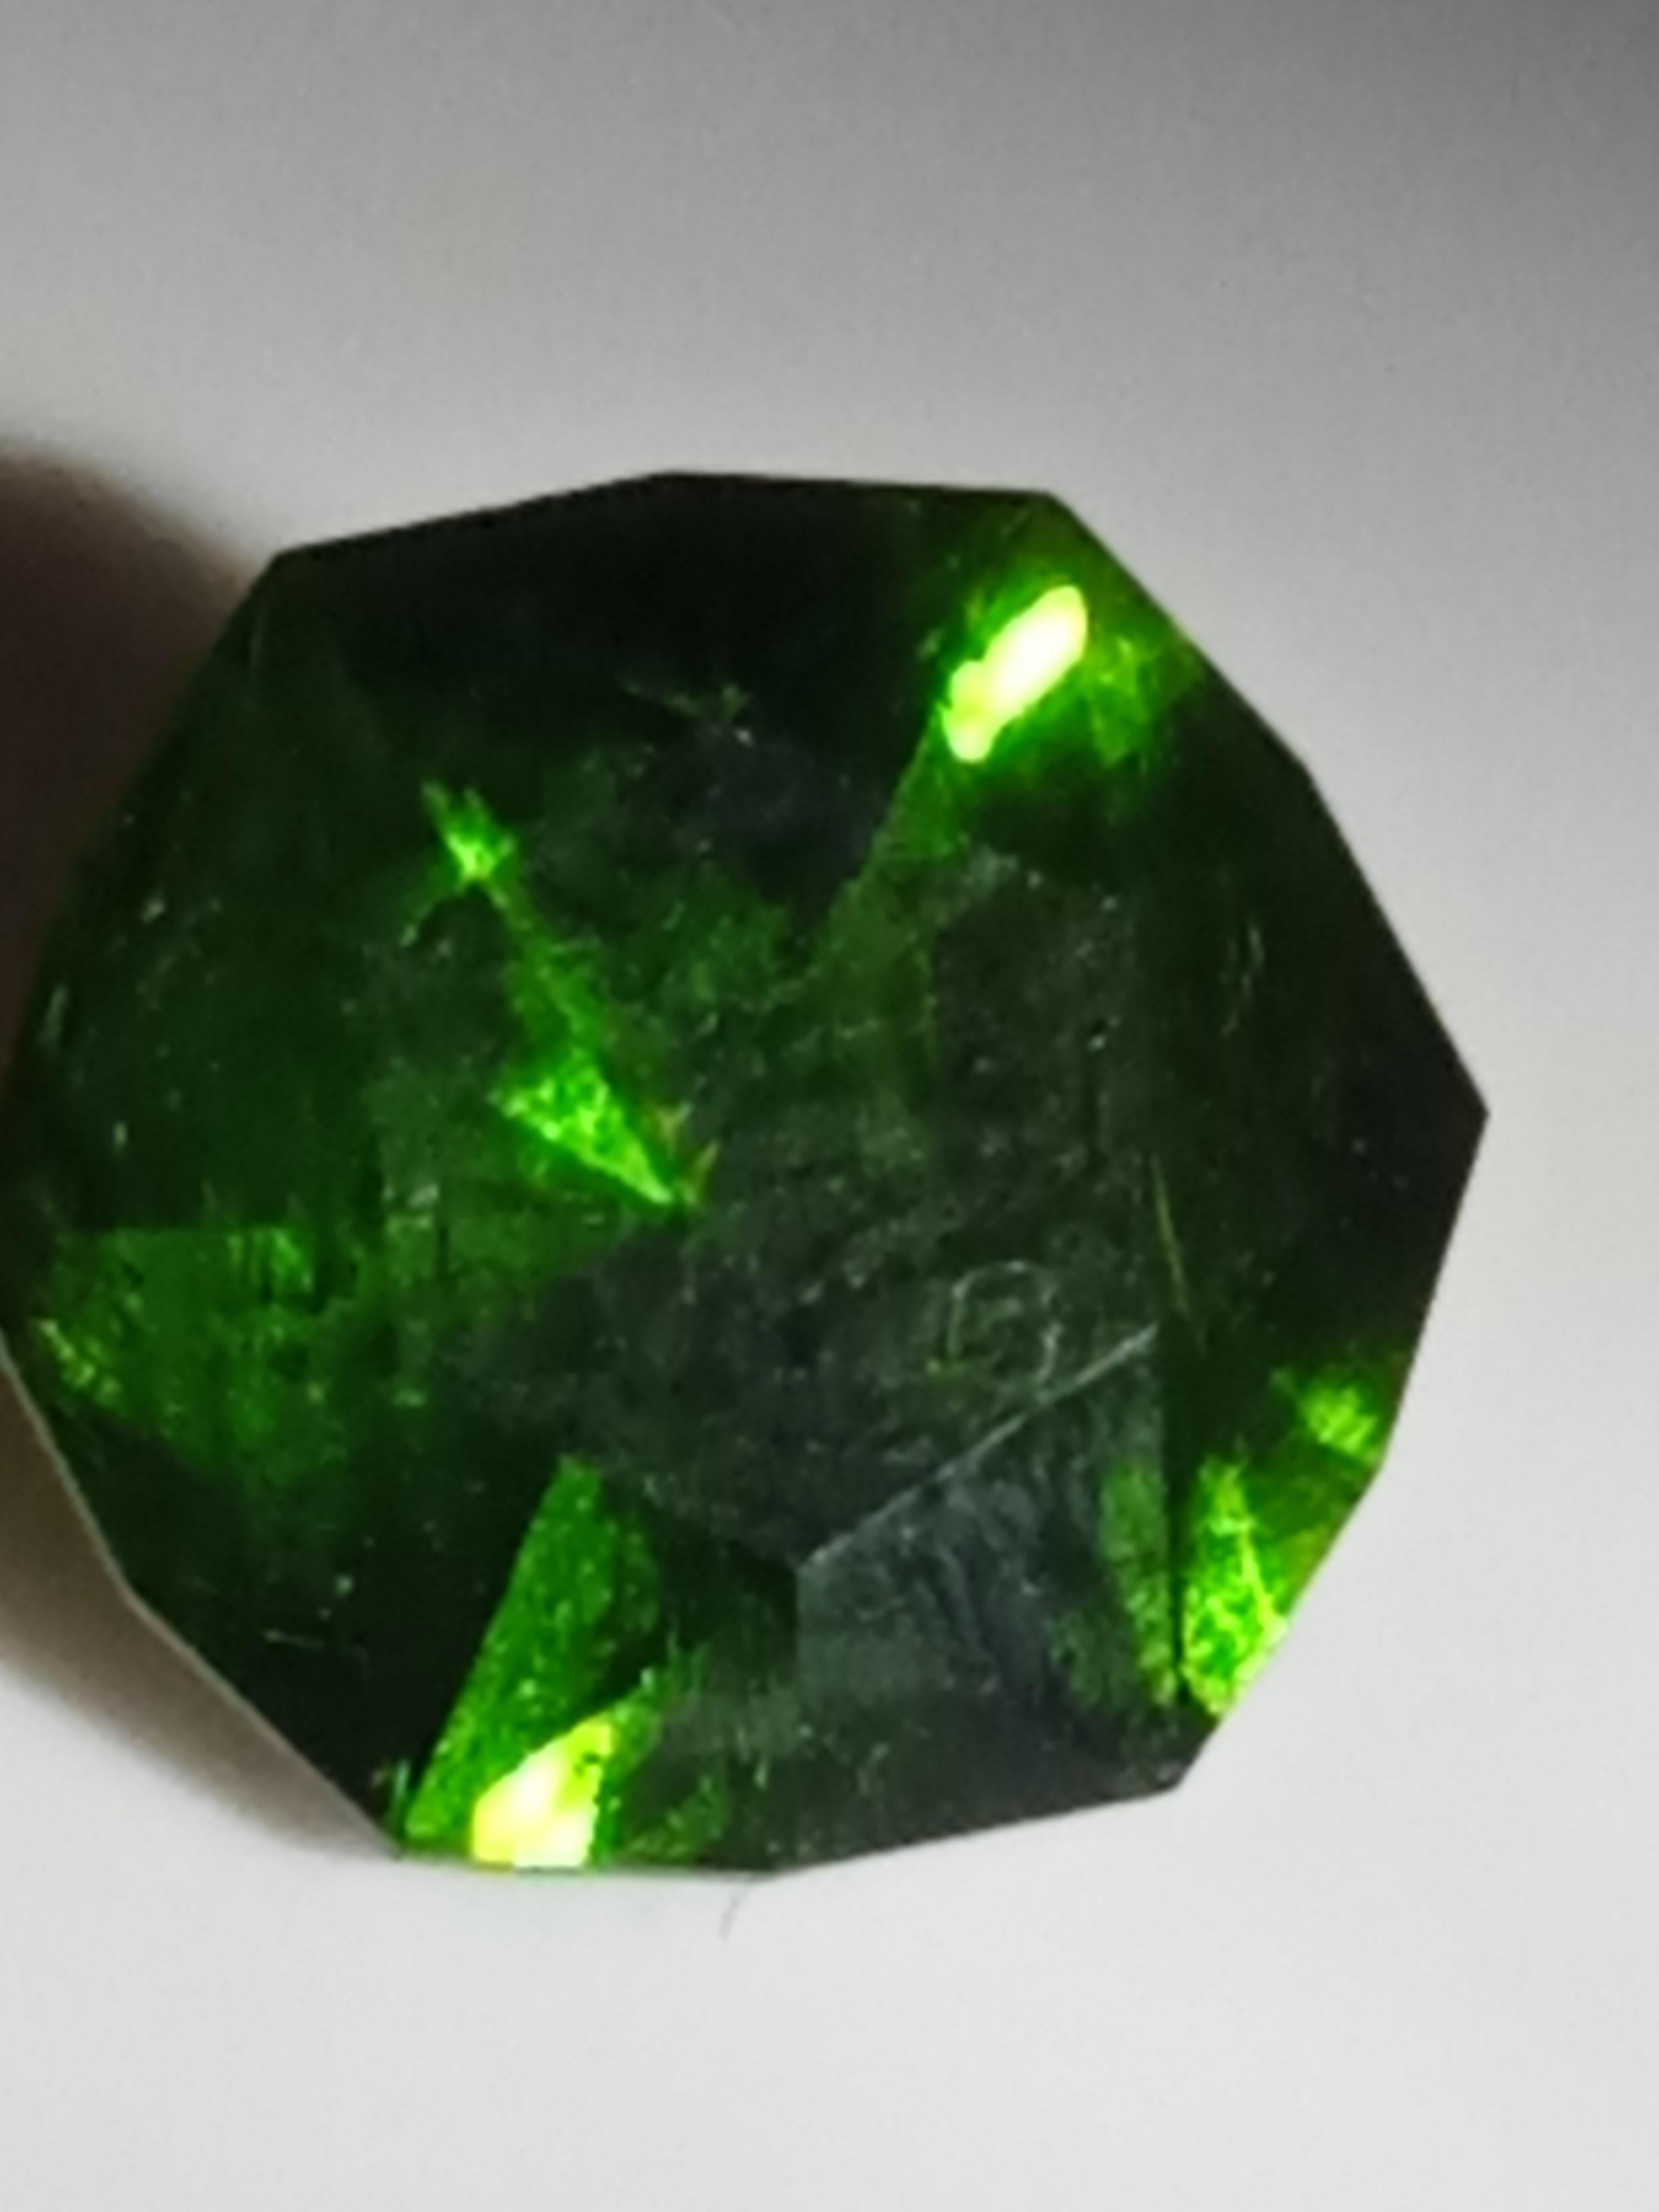 This rare and natural Diamantoid Garnet is a unique piece of gemstone. The gemstone boasts a beautiful green colour with a brilliant cut shape. It is transparent and has a slight inclusion clarity grade. The gemstone is from the Ukraine region and